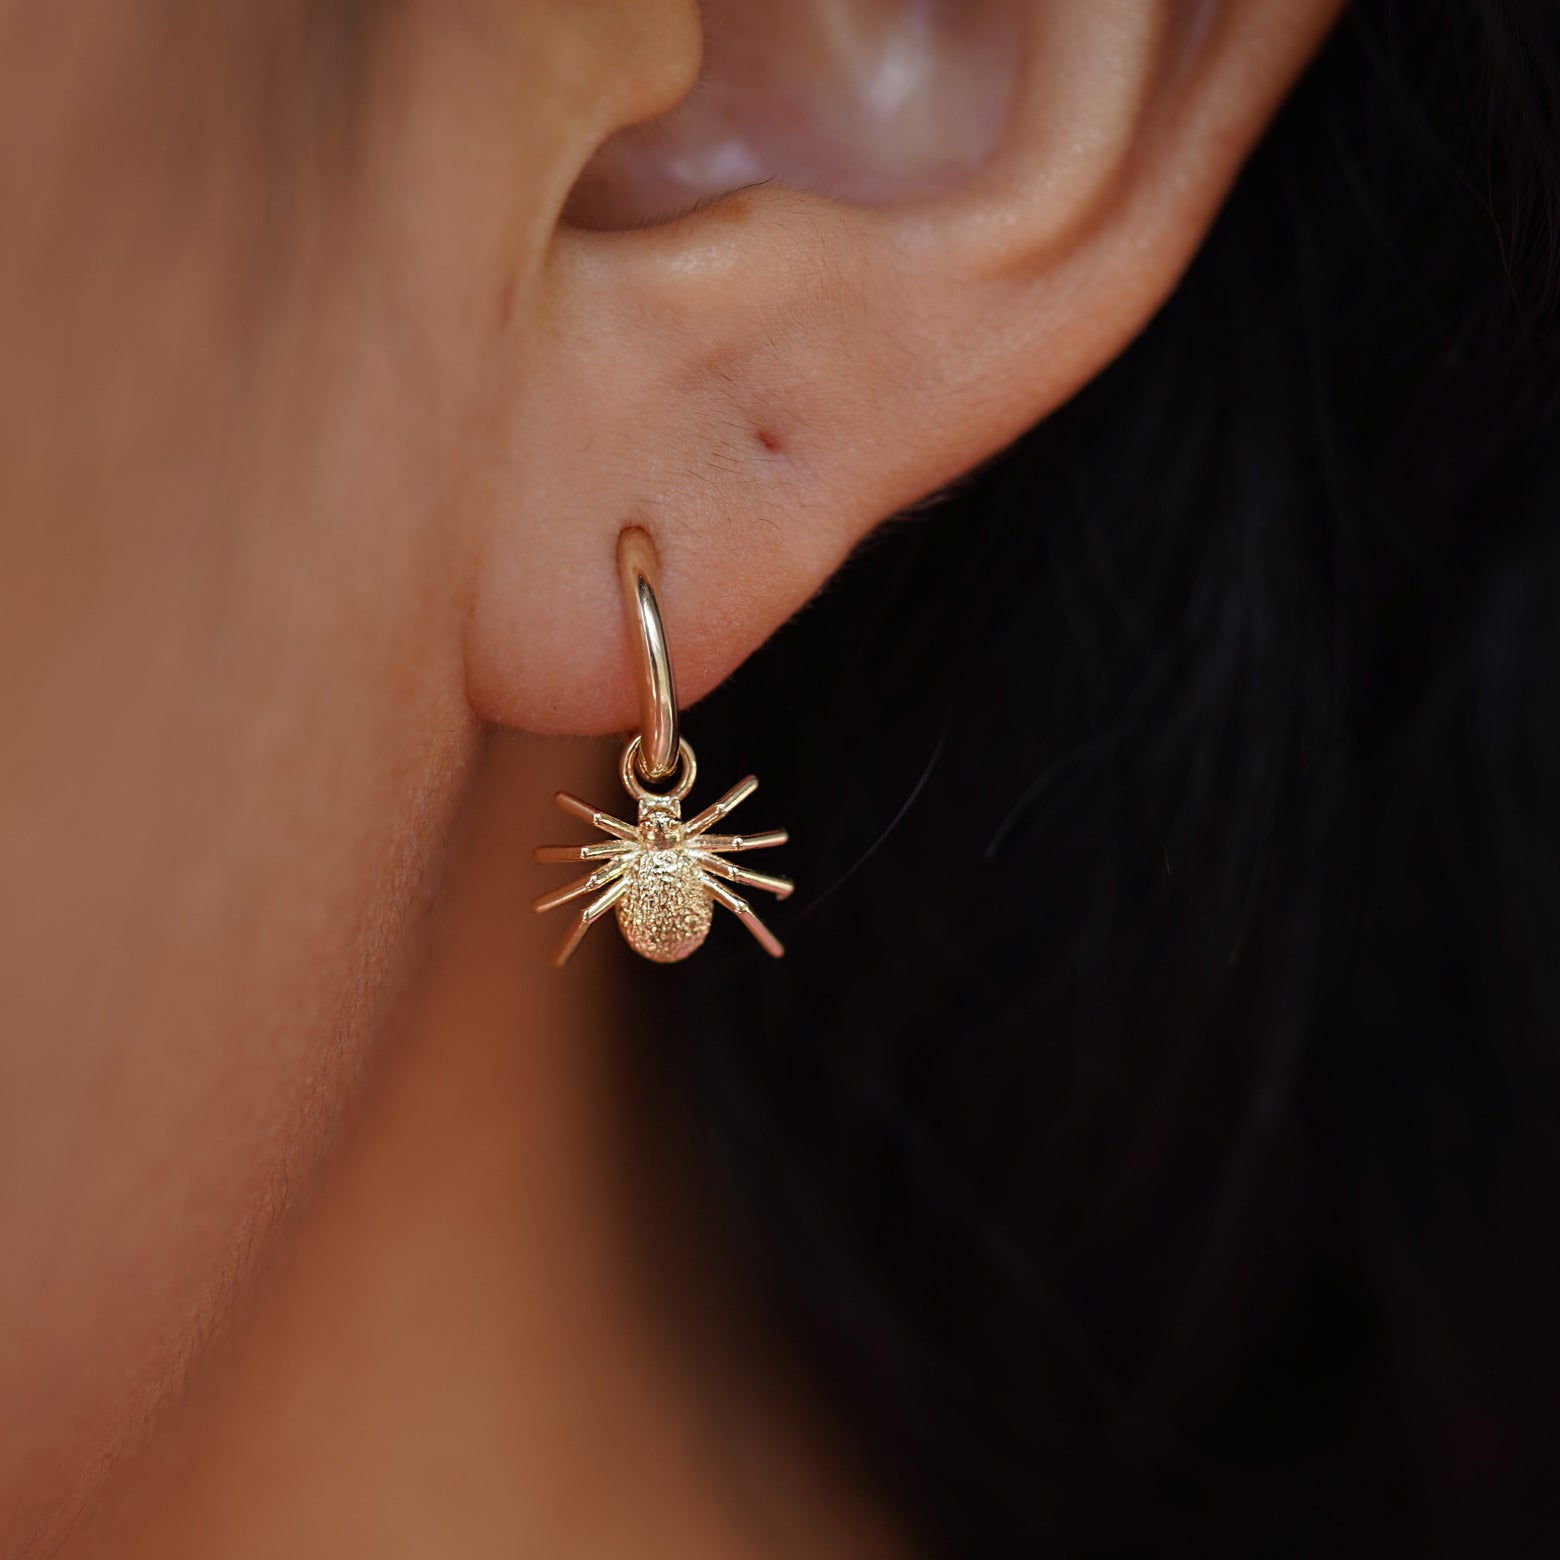 Close up view of a model's ear wearing a yellow gold Spider Charm on a Curvy Huggie Hoop